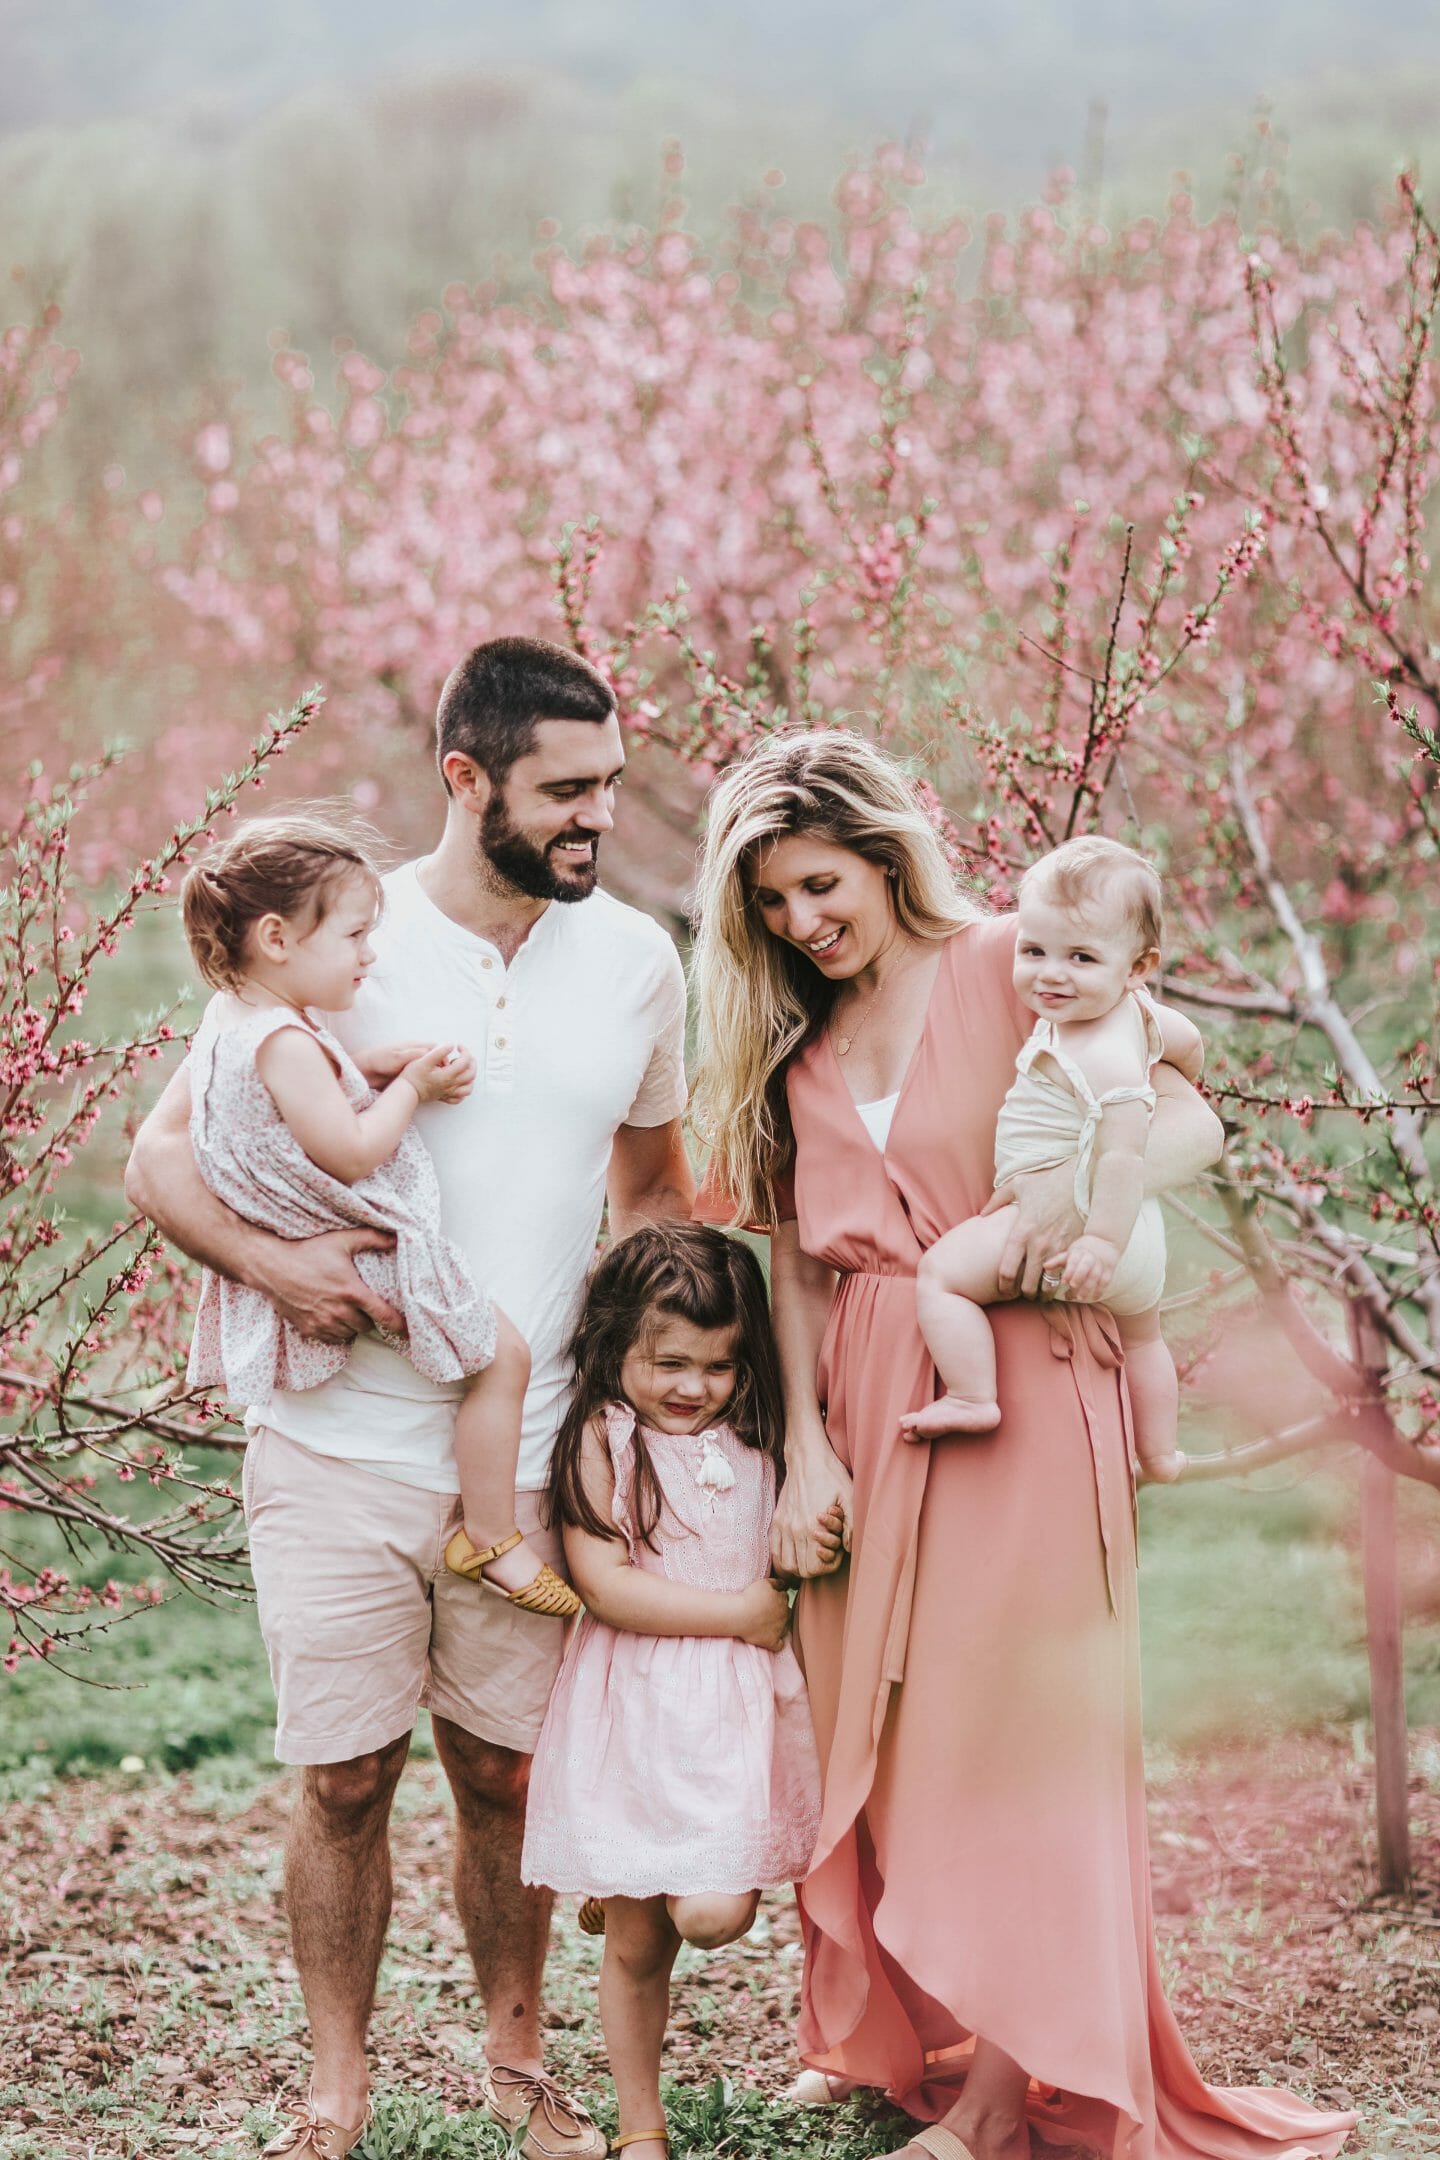 Pink outfit 1 70+ Best Chosen Family Photo Outfit Ideas in Summer - 46